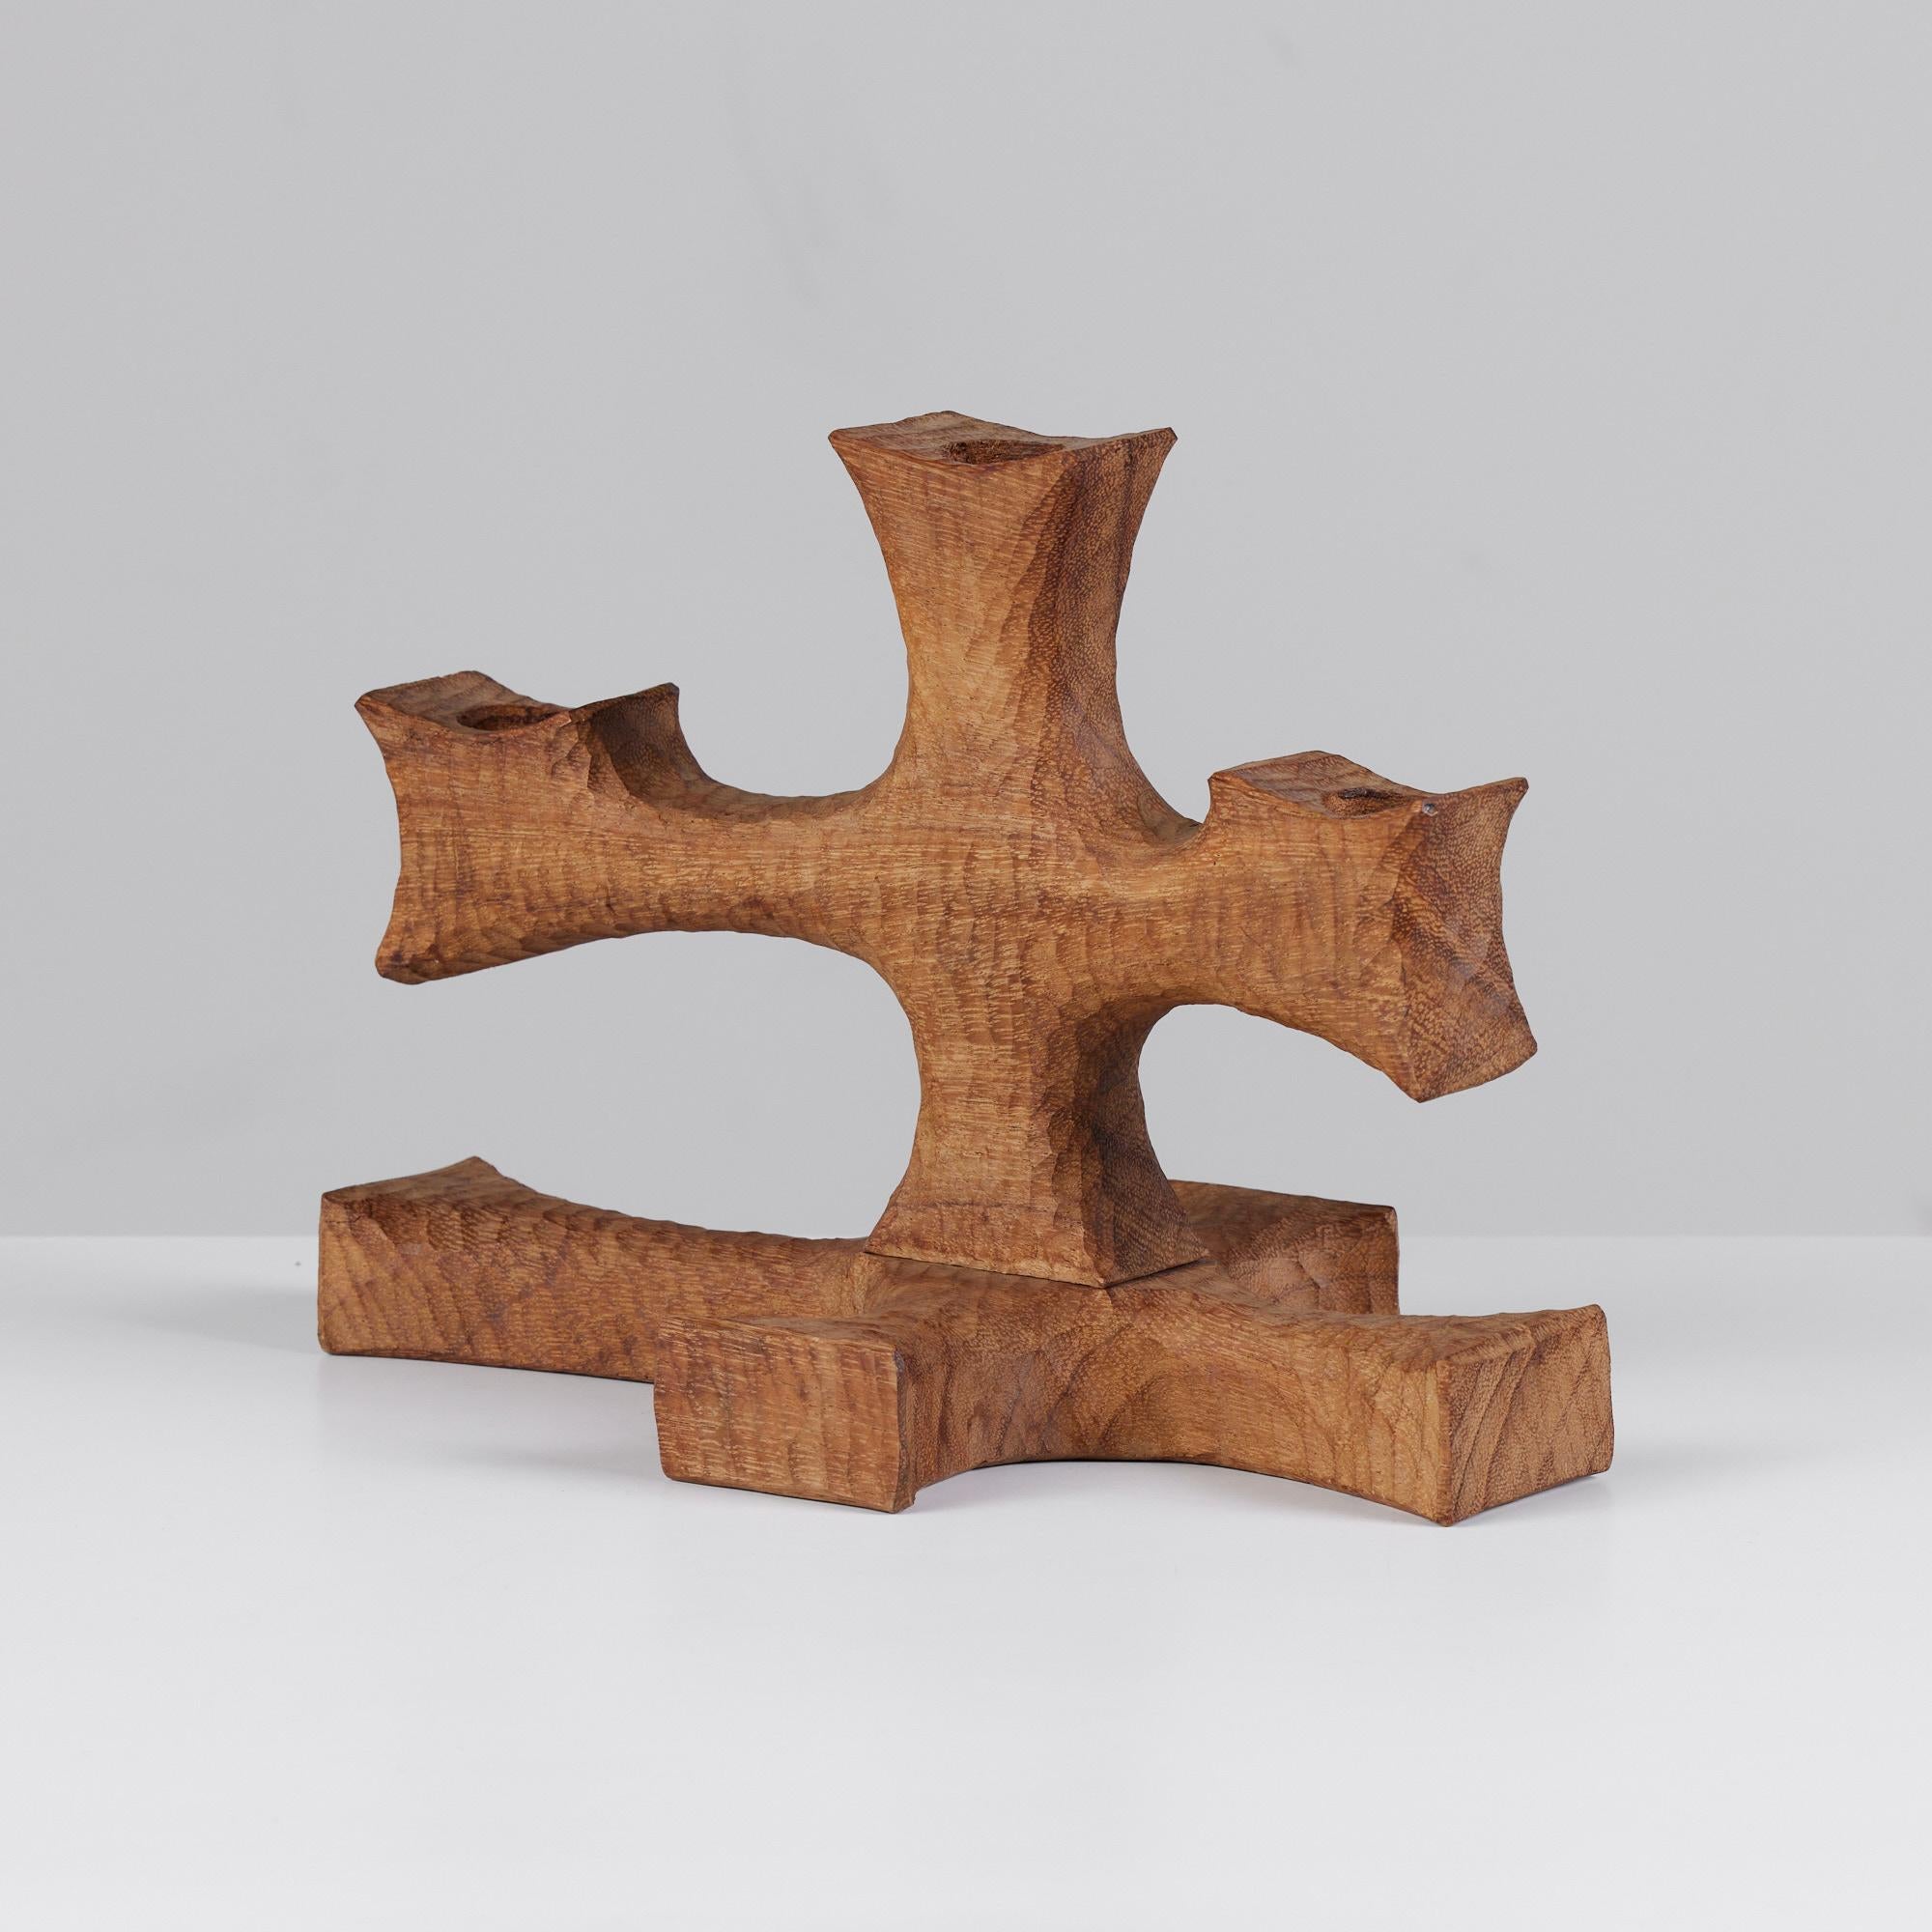 Don Shoemaker for Señal hand carved candelabra. Carved out of mahogany and left as bare wood, this piece holds three standard size candles. The carving marks, opposite in direction from the wood grain, give it texture and movement. The shape of the